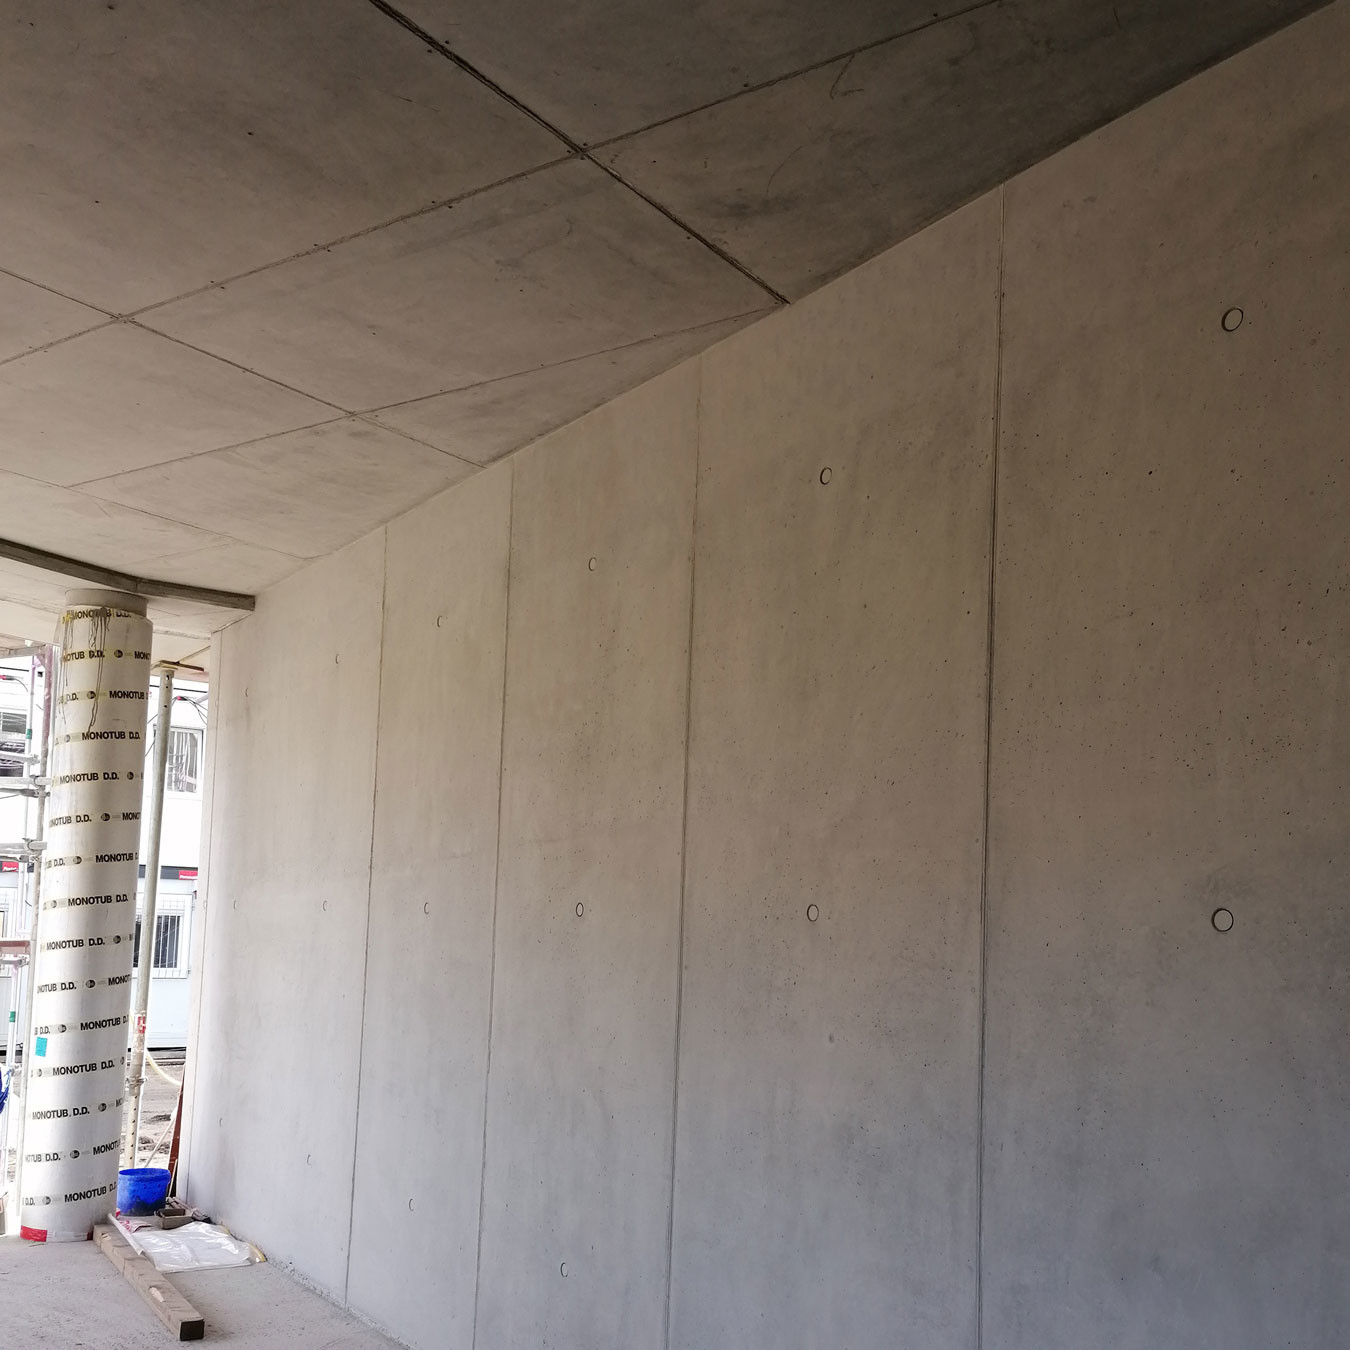 Internal view of concrete residence